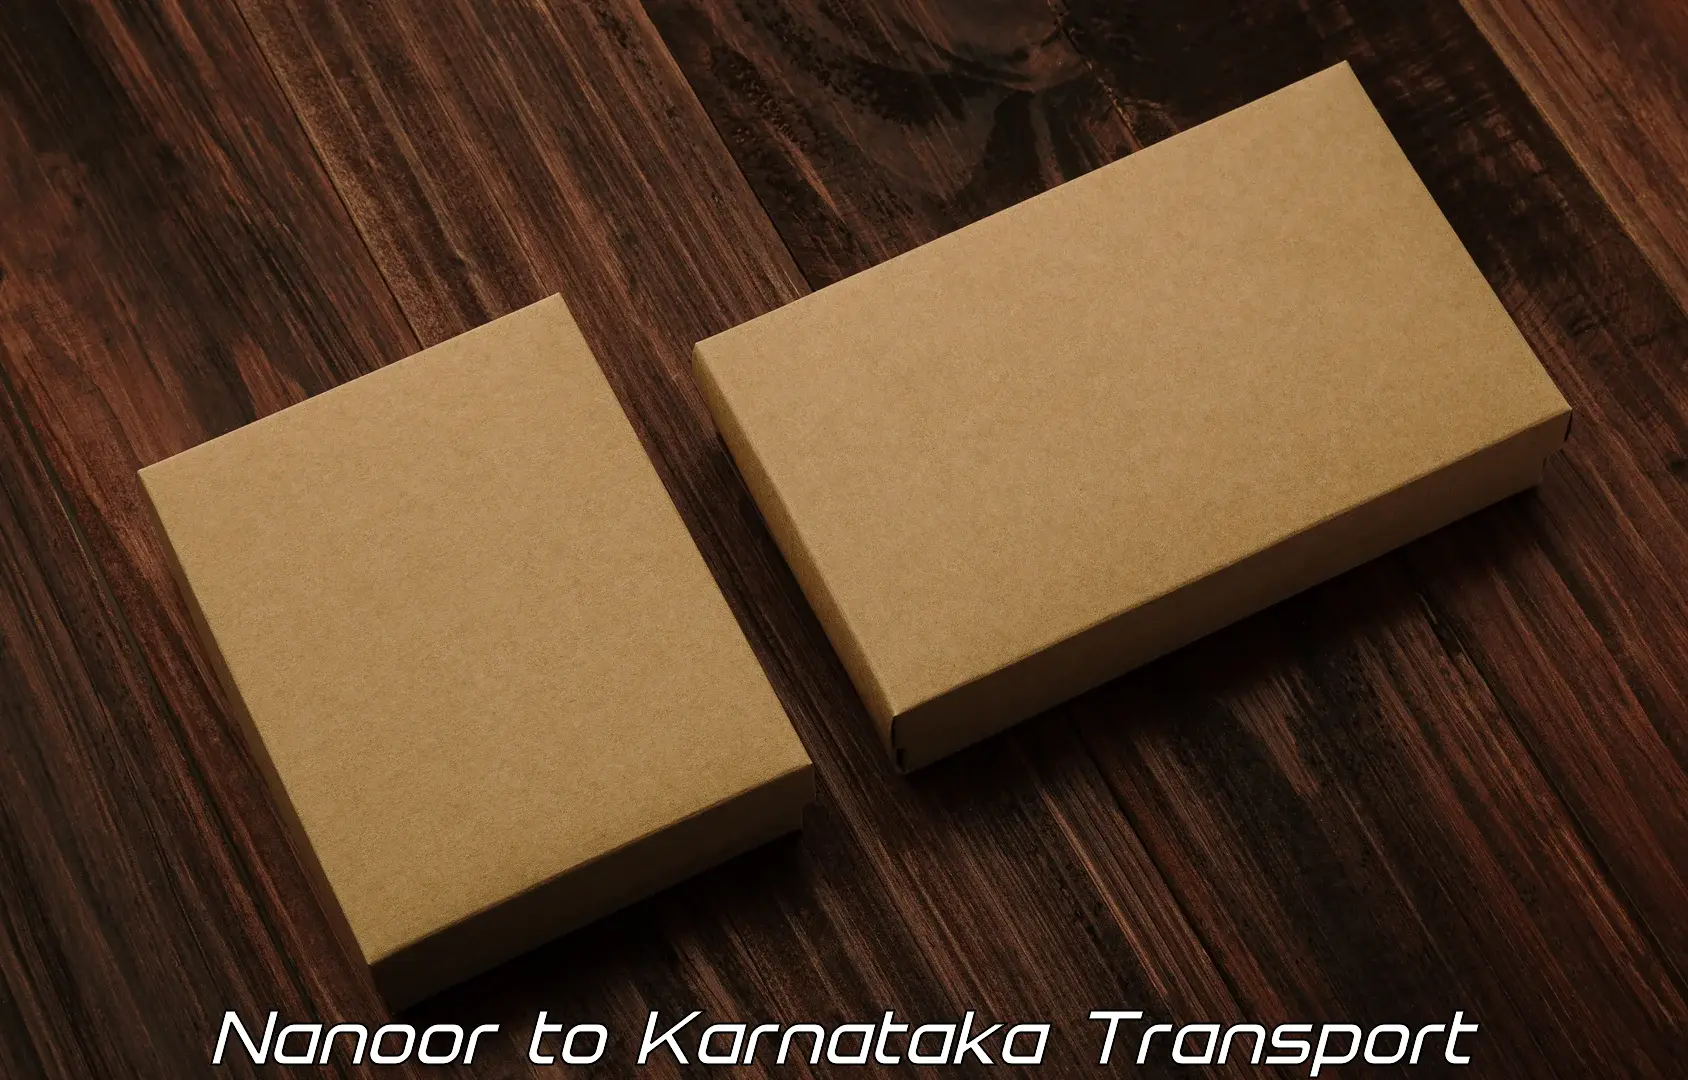 Daily transport service Nanoor to Mangalore